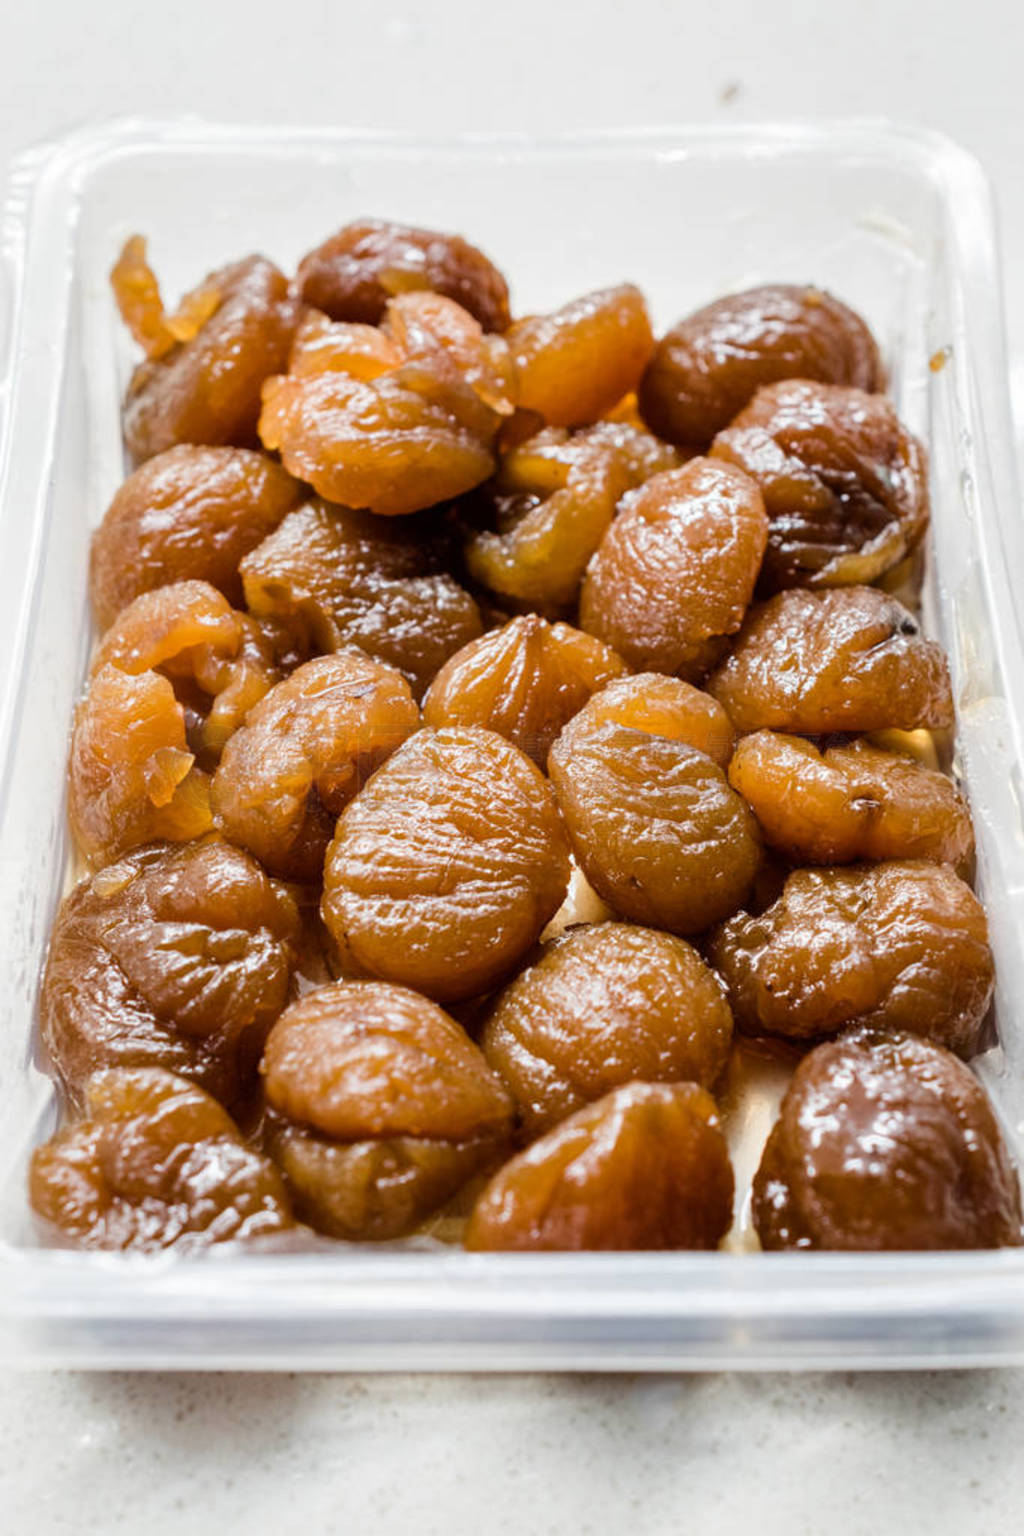 Take Away Turkish Chestnut Dessert in Plastic Box Package or Con